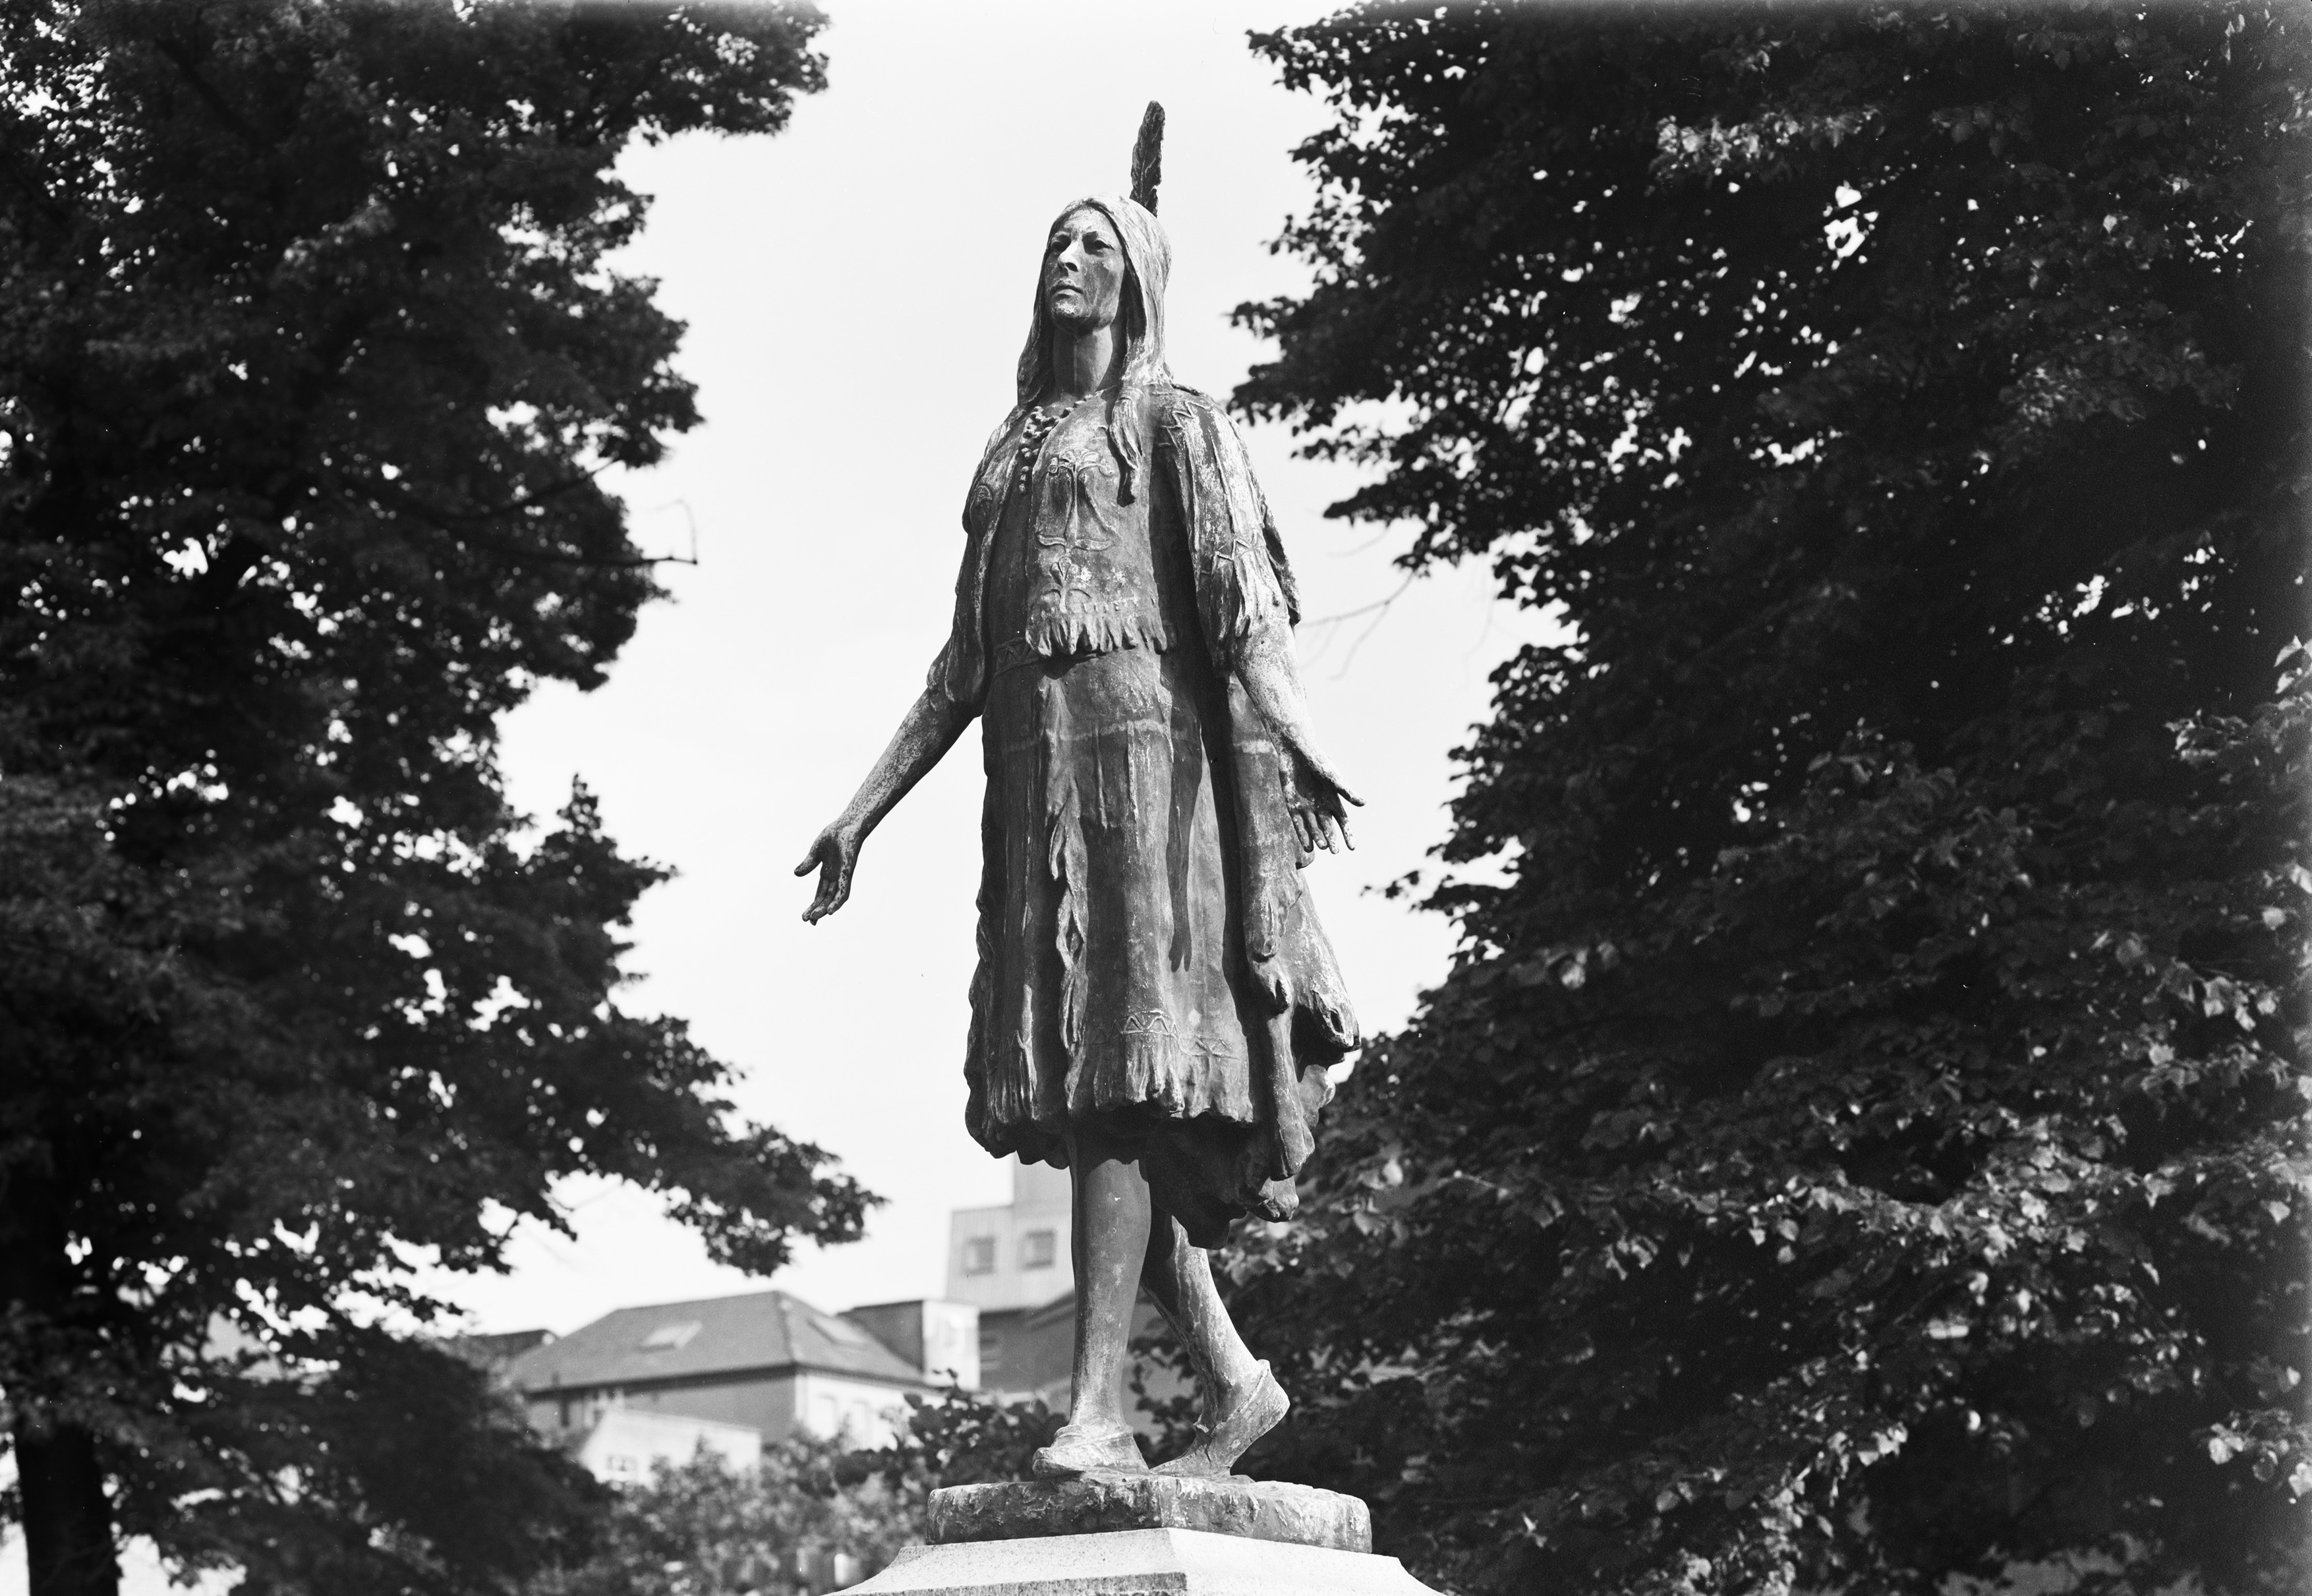 Archive image of the Pocahontas statue which has been relisted to mark 400 years since Pocahontas' death